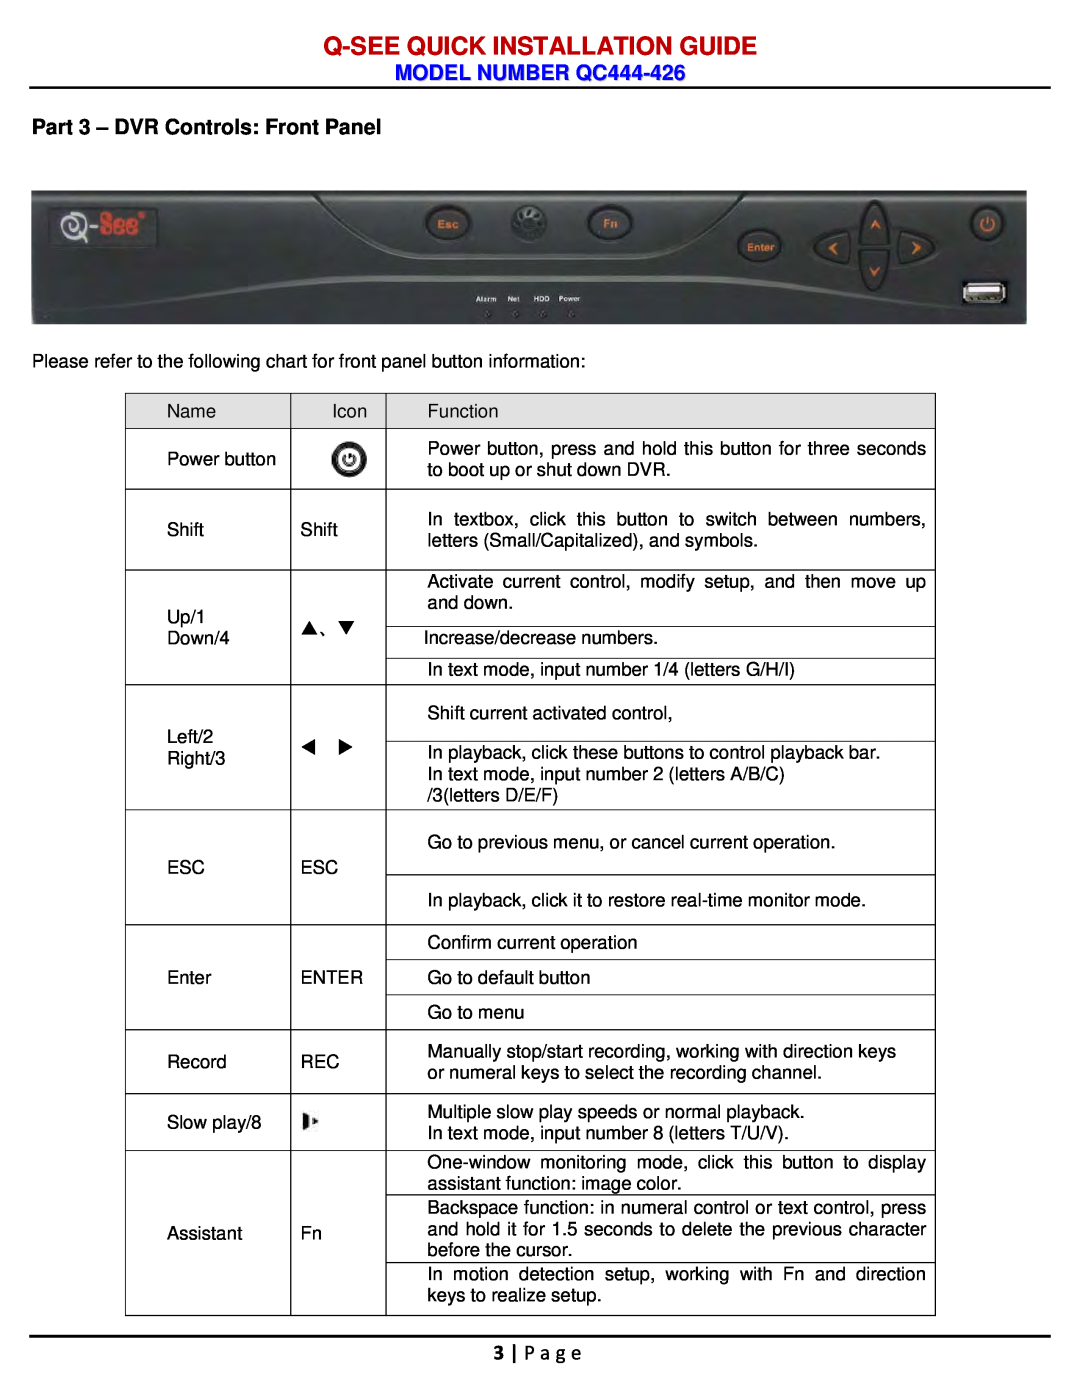 Q-See manual Part 3 - DVR Controls Front Panel, P a g e, Q-Seequick Installation Guide, MODEL NUMBER QC444-426 